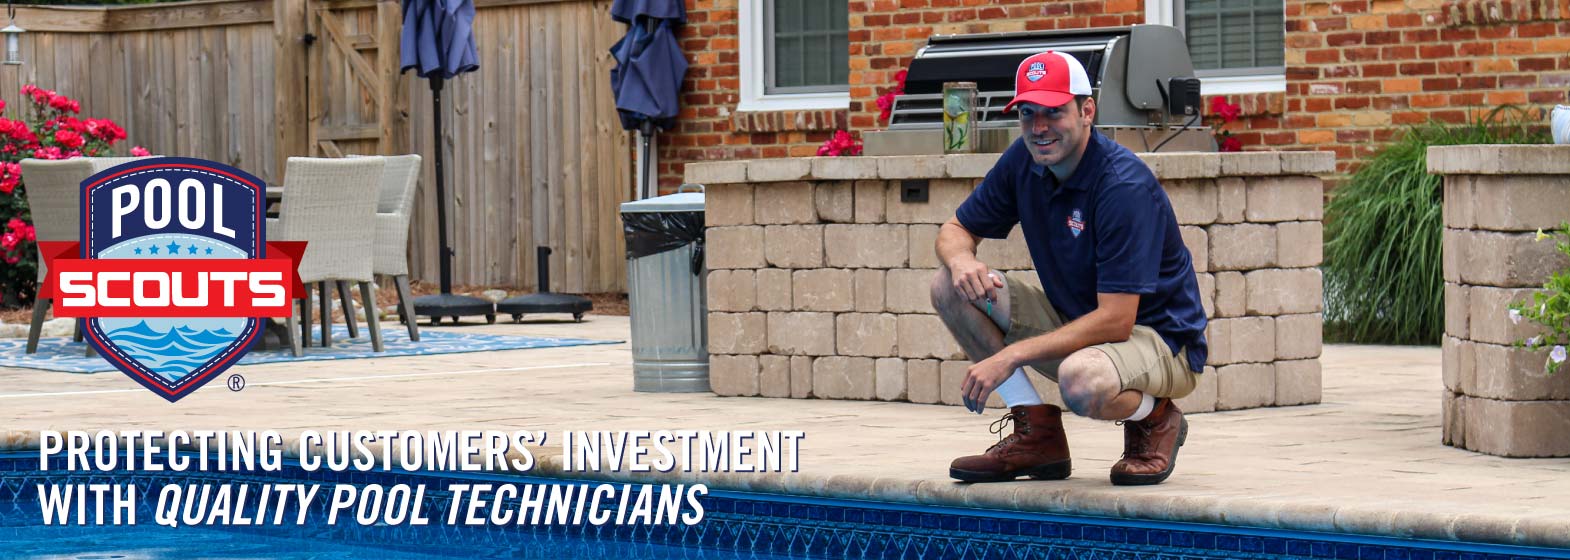 Pool technician kneeling next to a pool and smiling